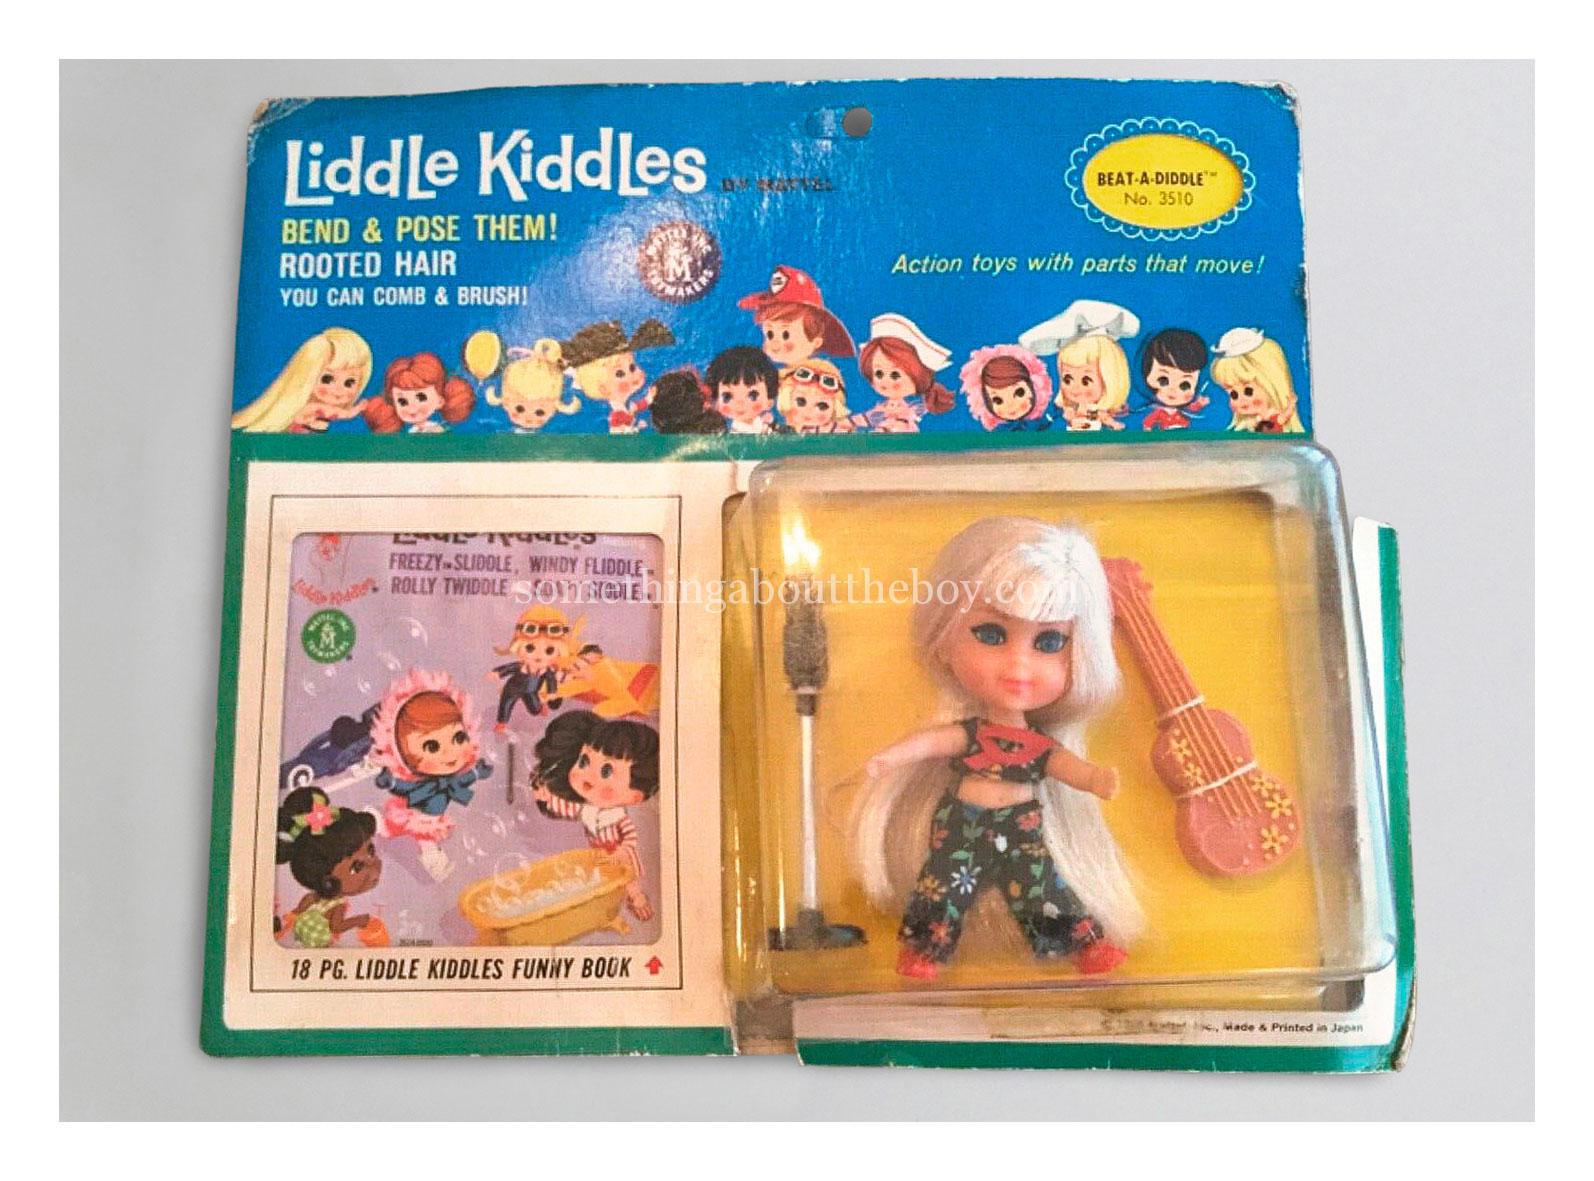 1966-67 #3510 Liddle Kiddle Beat-a-Diddle set